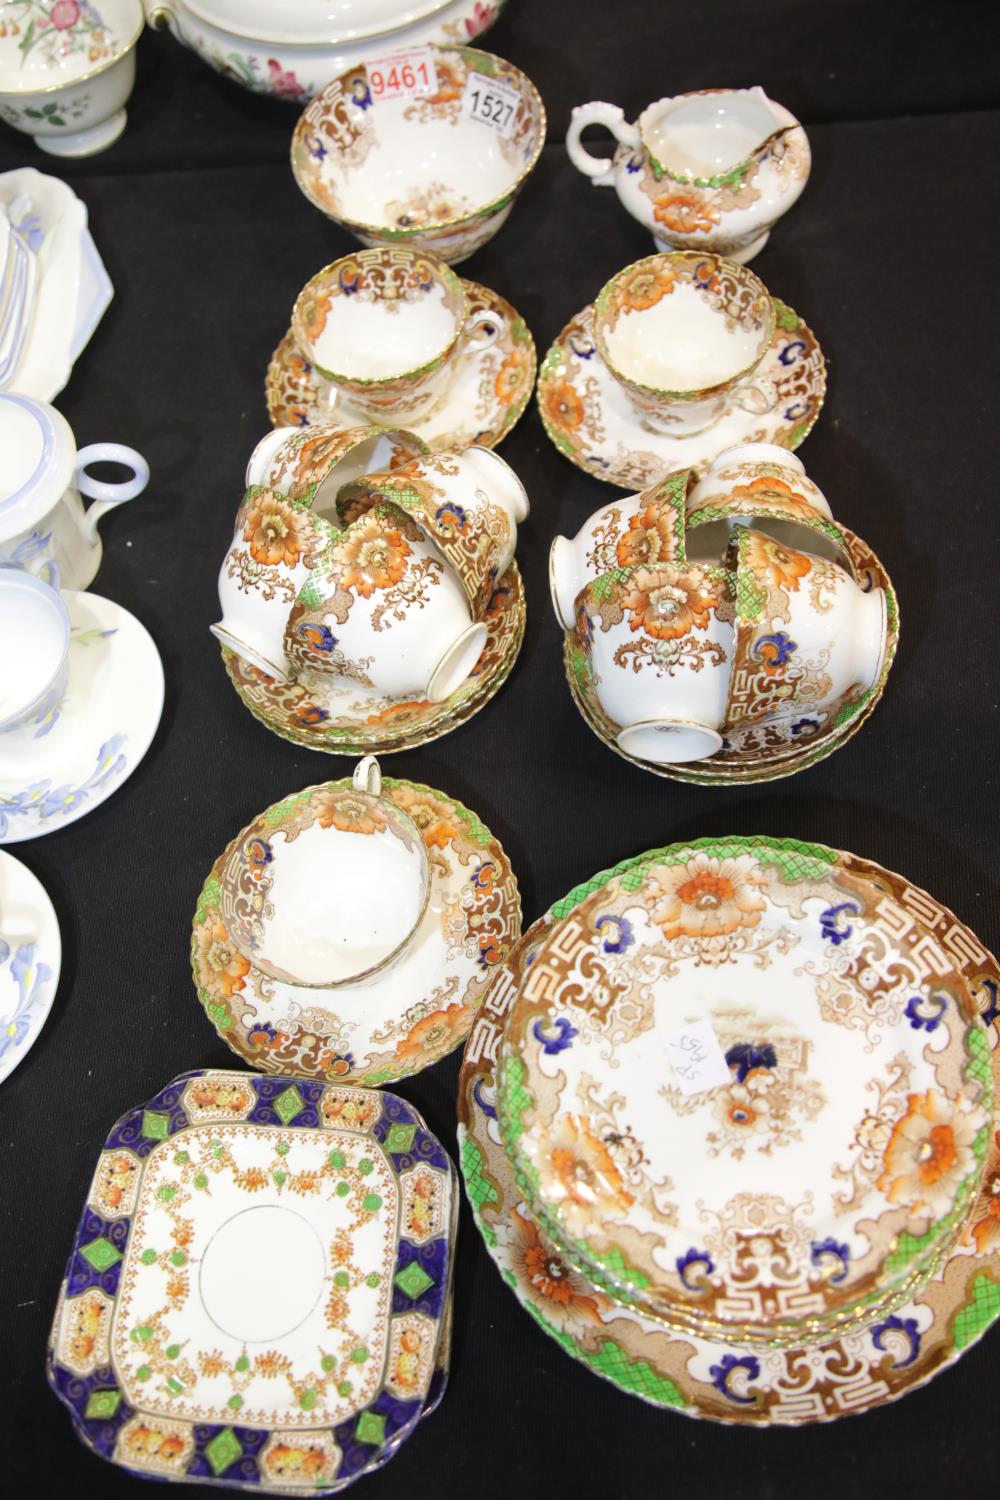 Large quantity of Imari ceramics by Samuel Radford including plates, cups, saucers. Not available